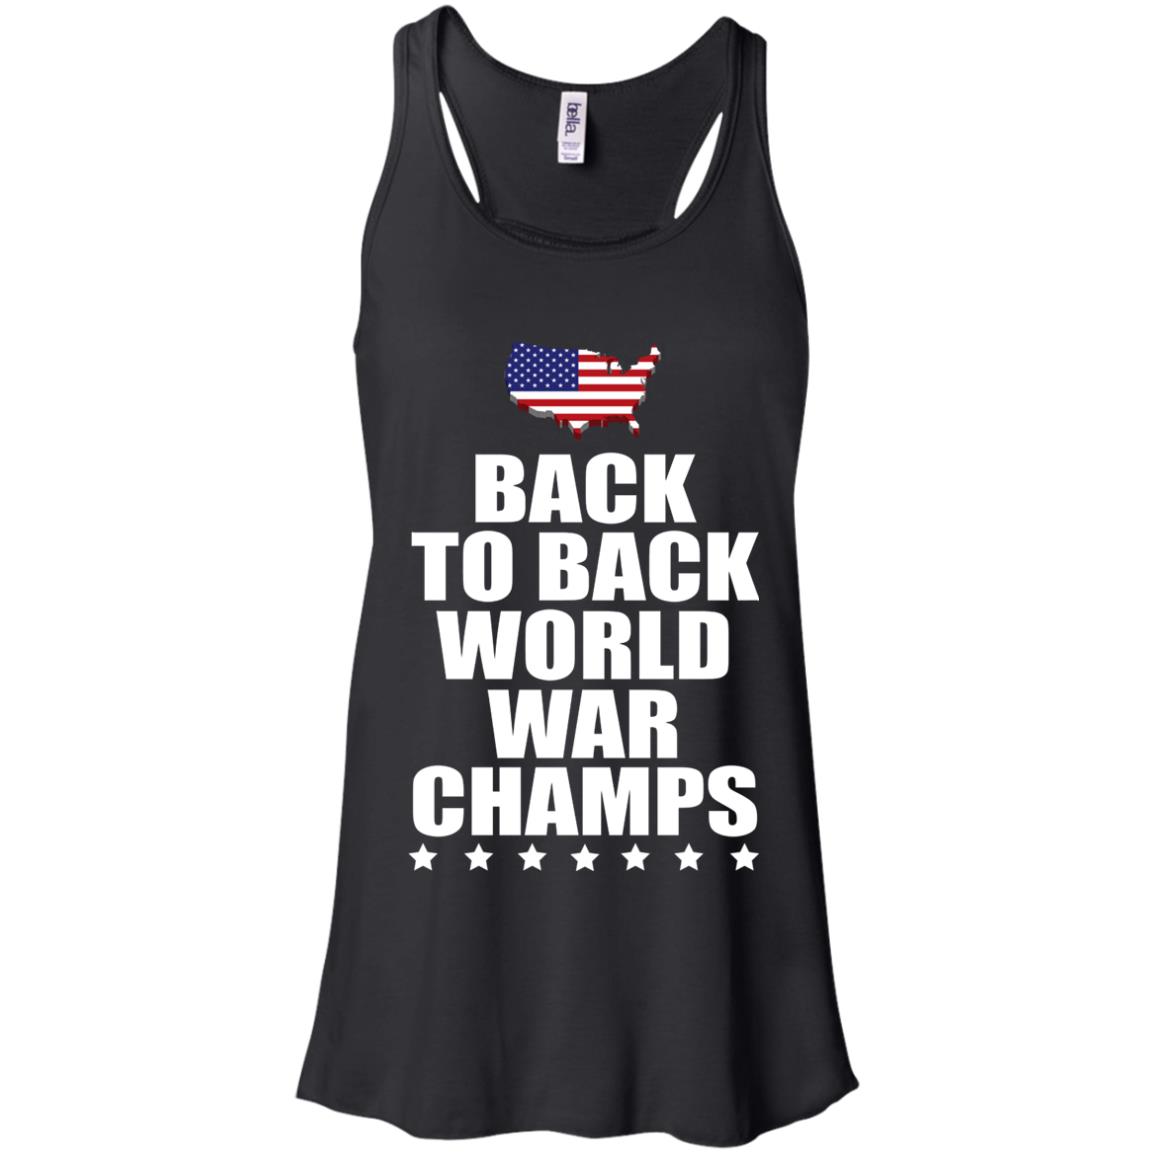 back to back ww2 champs shirt